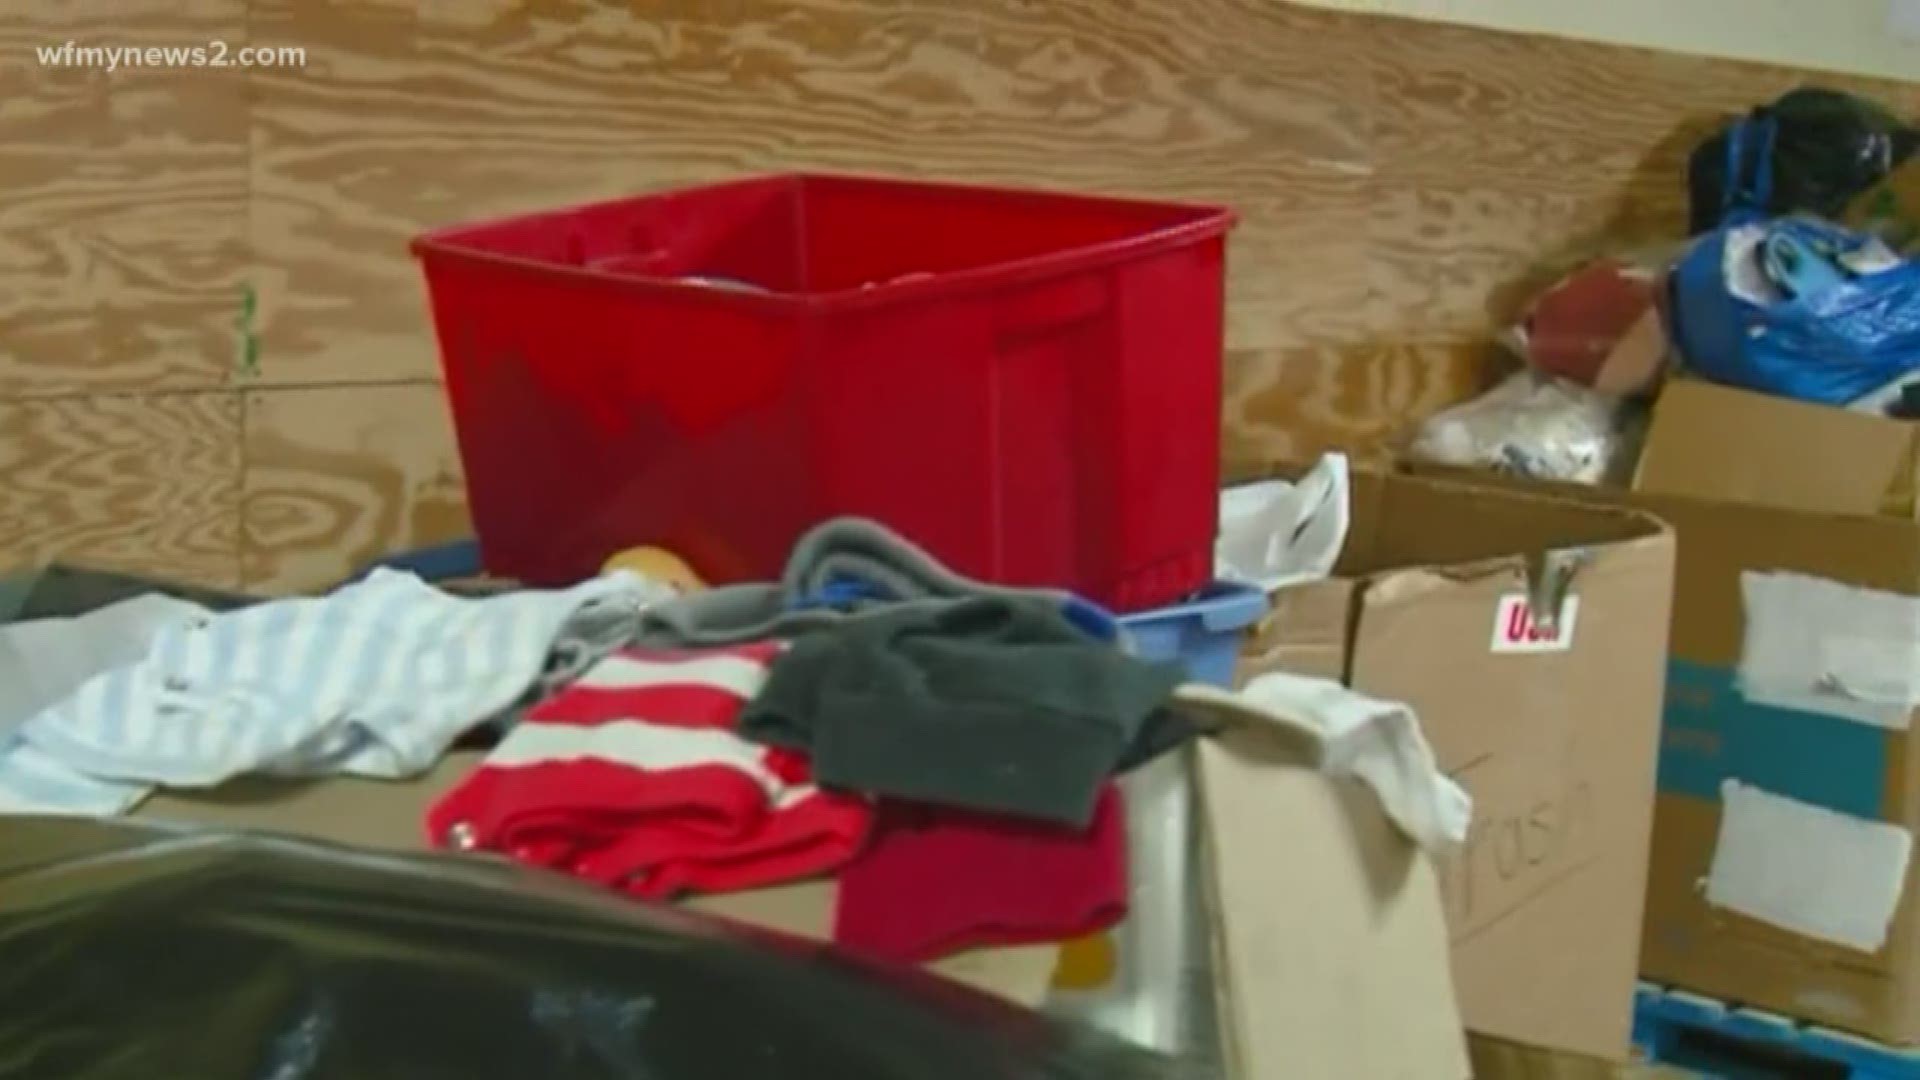 Triad Goodwill wants you to donate much needed items, such as clothes and household goods.